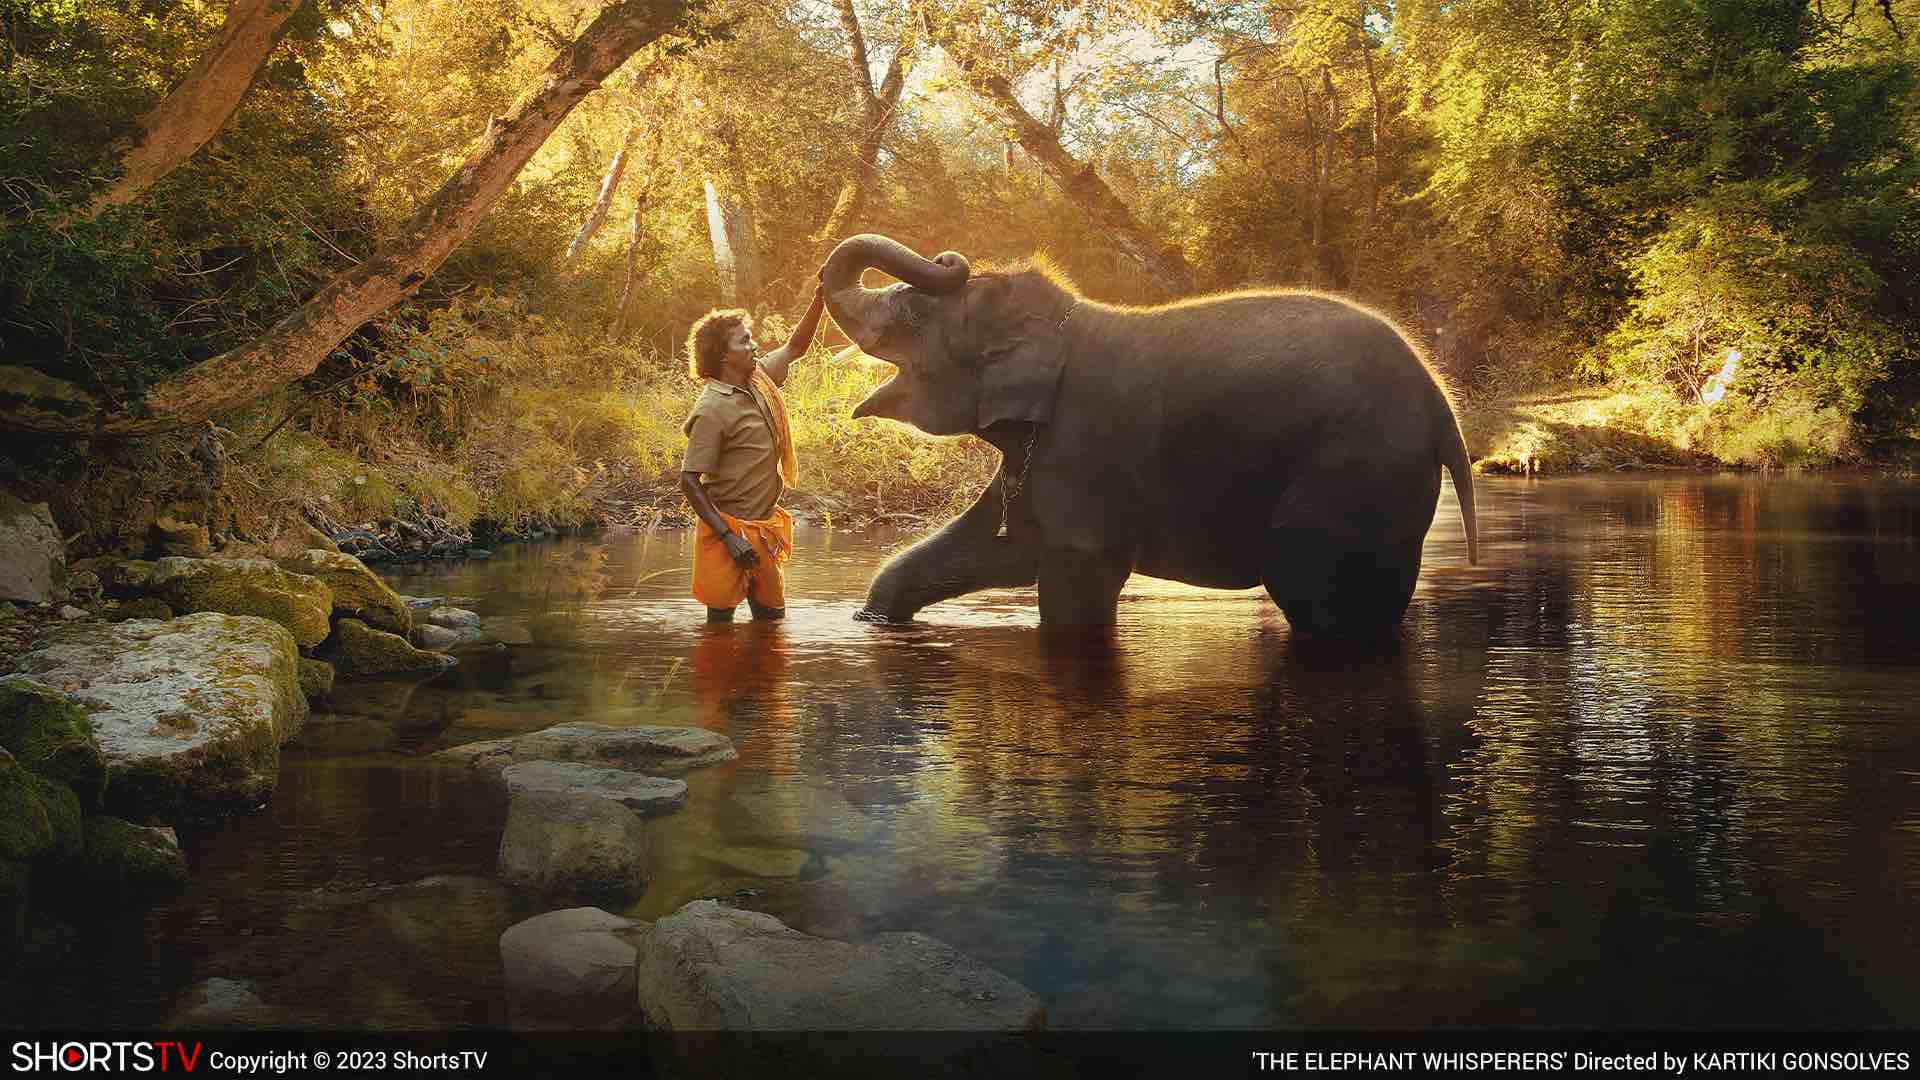 An orphaned elephant being caressed by a man in the shallow of a river, in Elephant Whisperers, an Oscar 2023 nominated short documentary